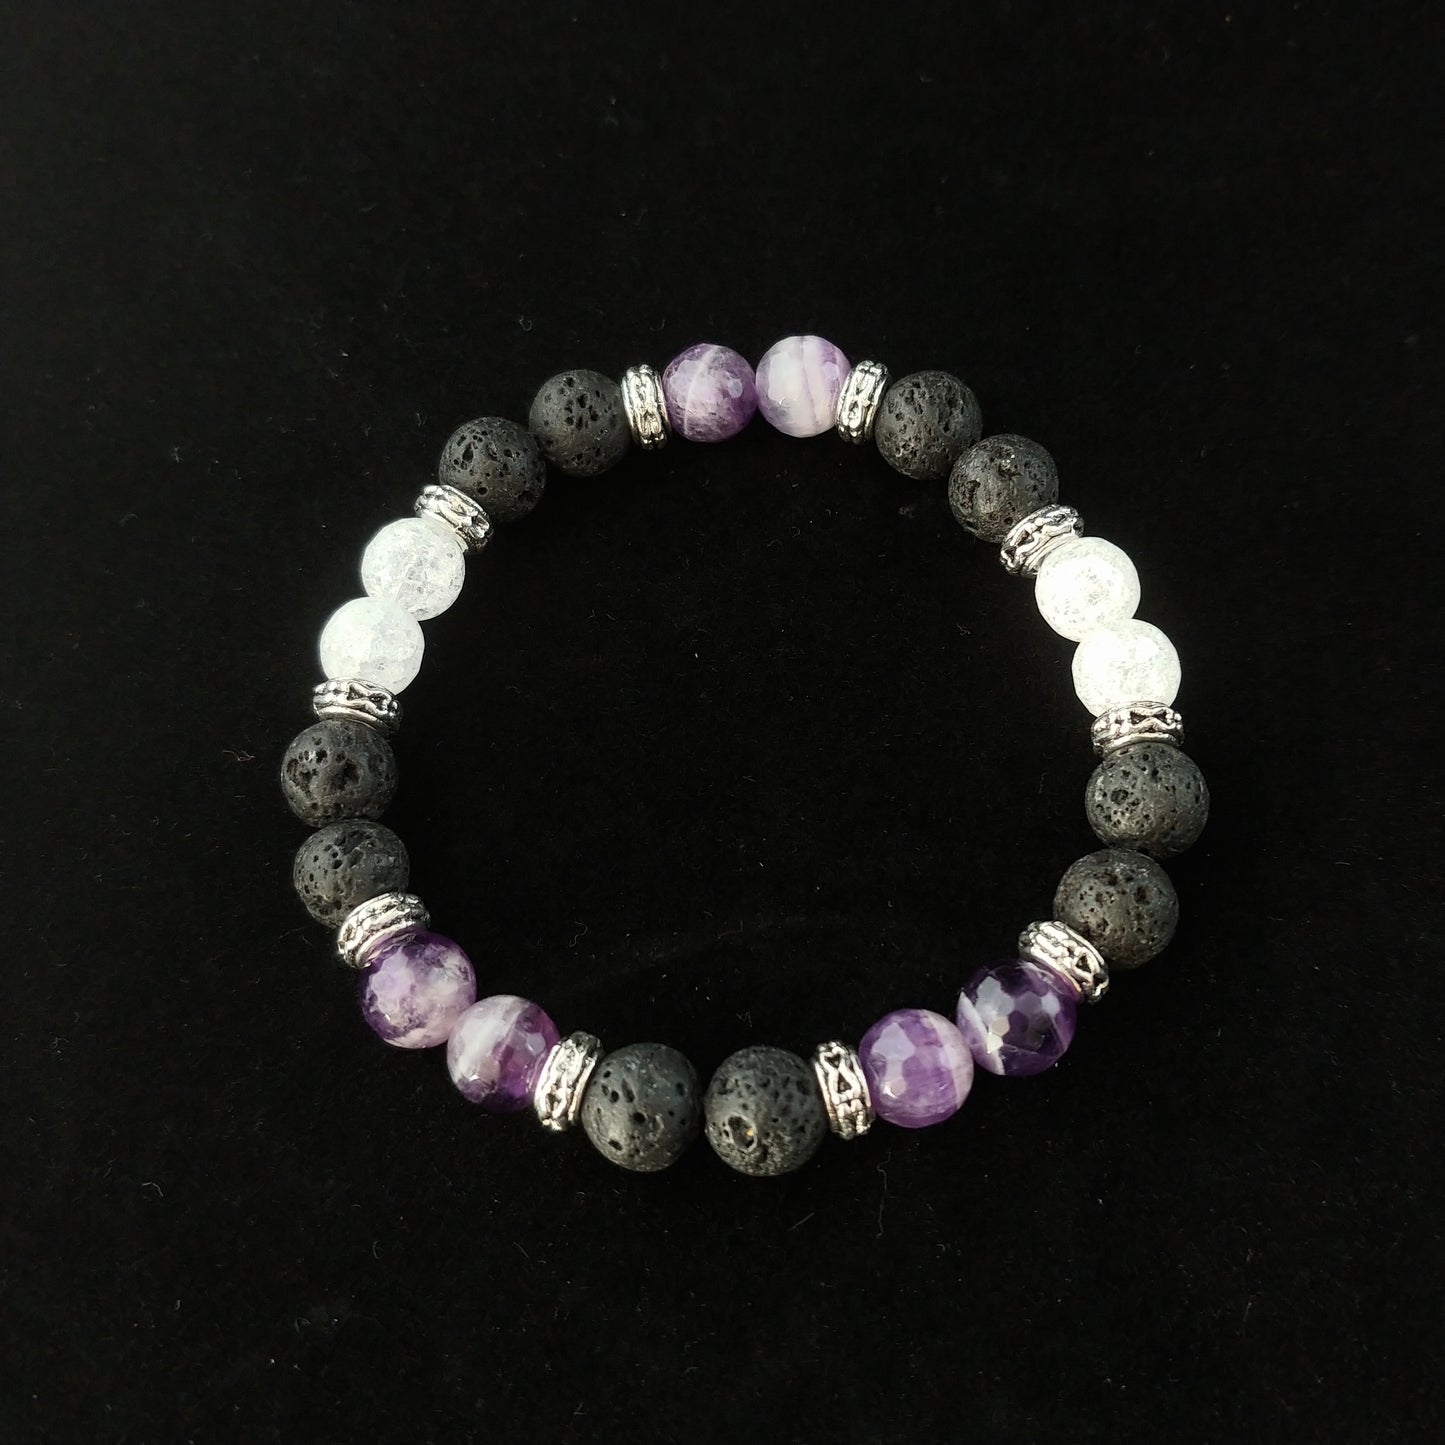 Amethyst Stone and Crystal Ice Beads Bracelet